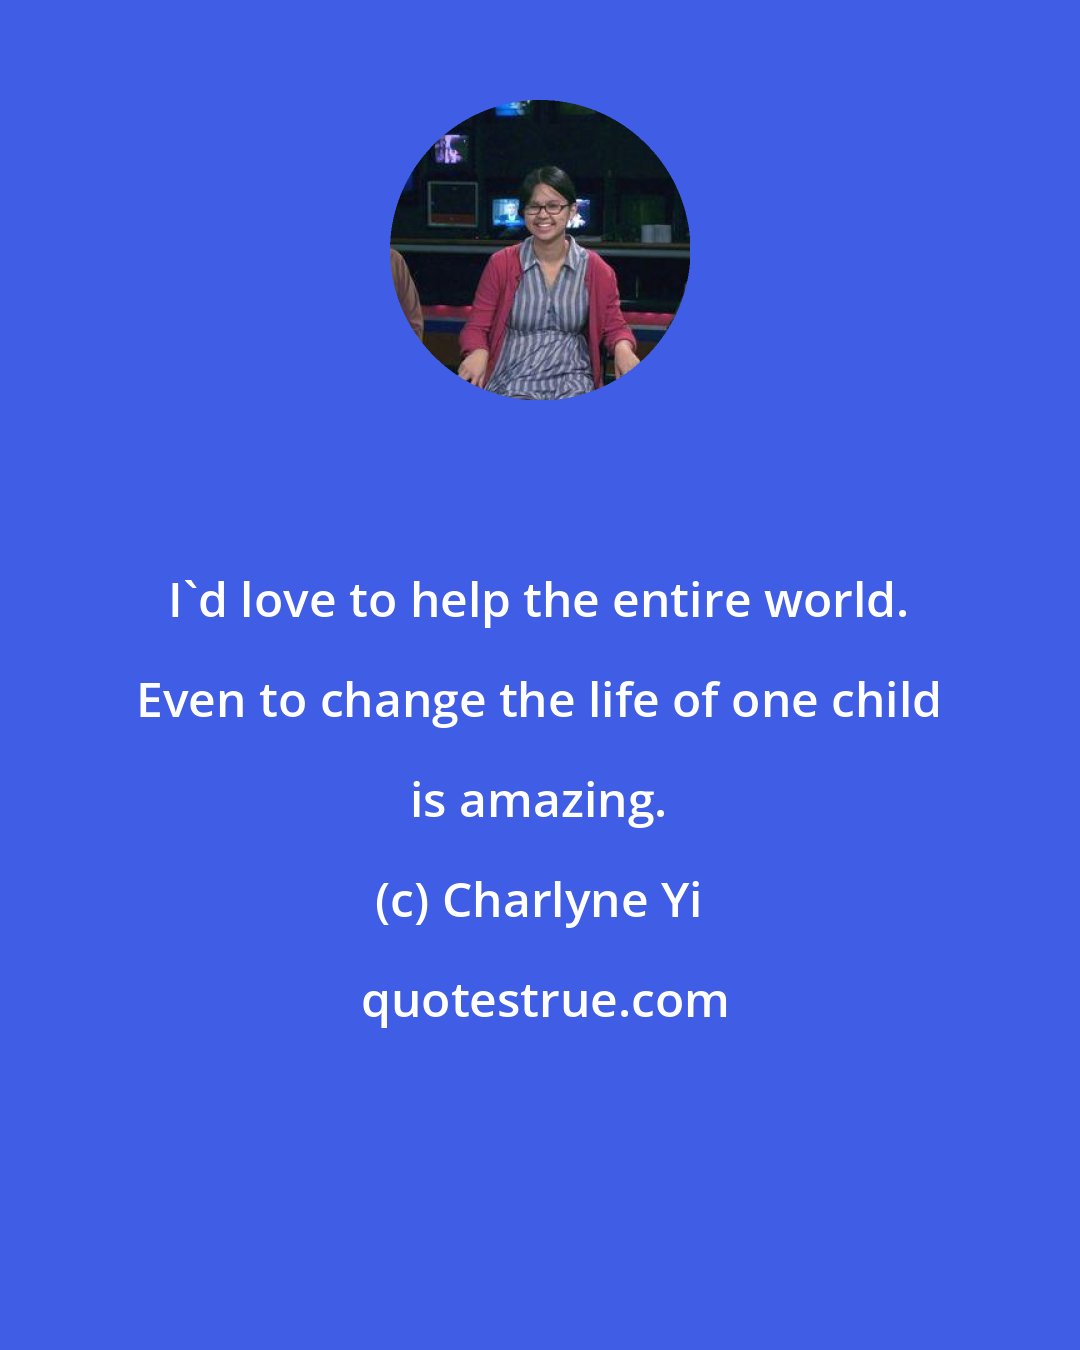 Charlyne Yi: I'd love to help the entire world. Even to change the life of one child is amazing.